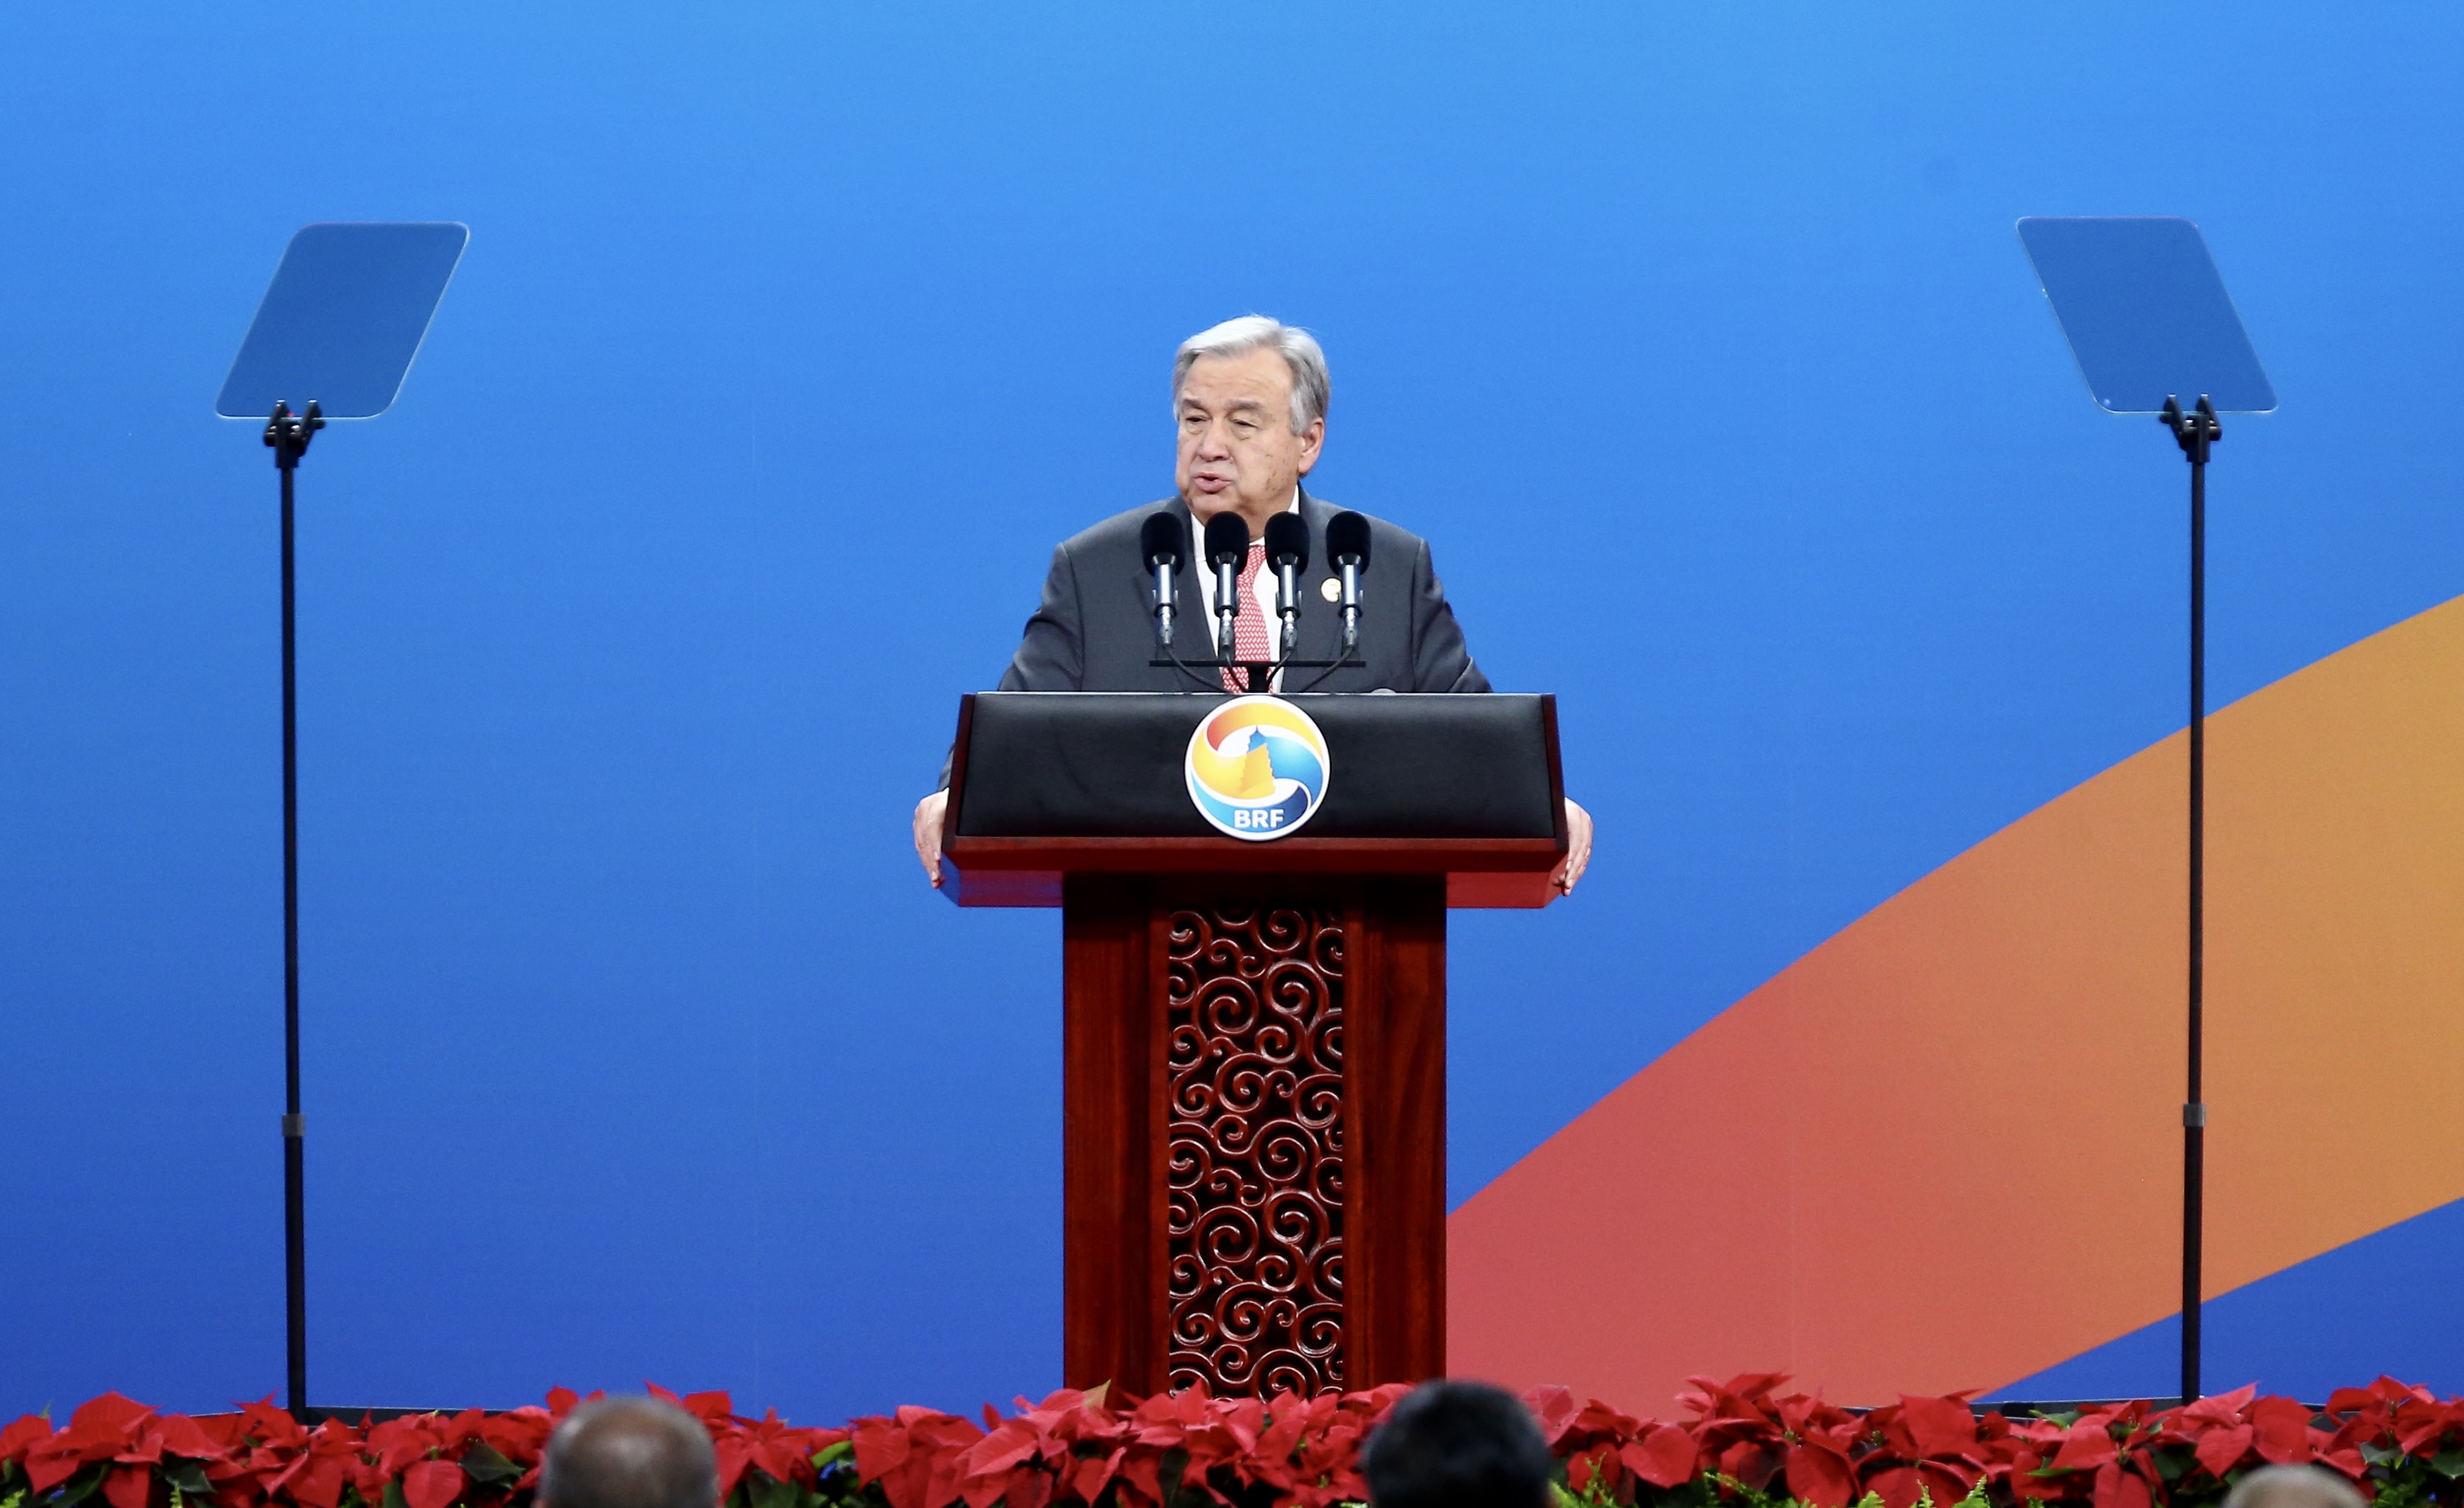 UN Secretary-General Antonio Guterres speaks at the opening ceremony of the Belt and Road Forum for International Cooperation held in Beijing on Sunday, May 14, 2017. [Photo: China Plus/ Li Jin]